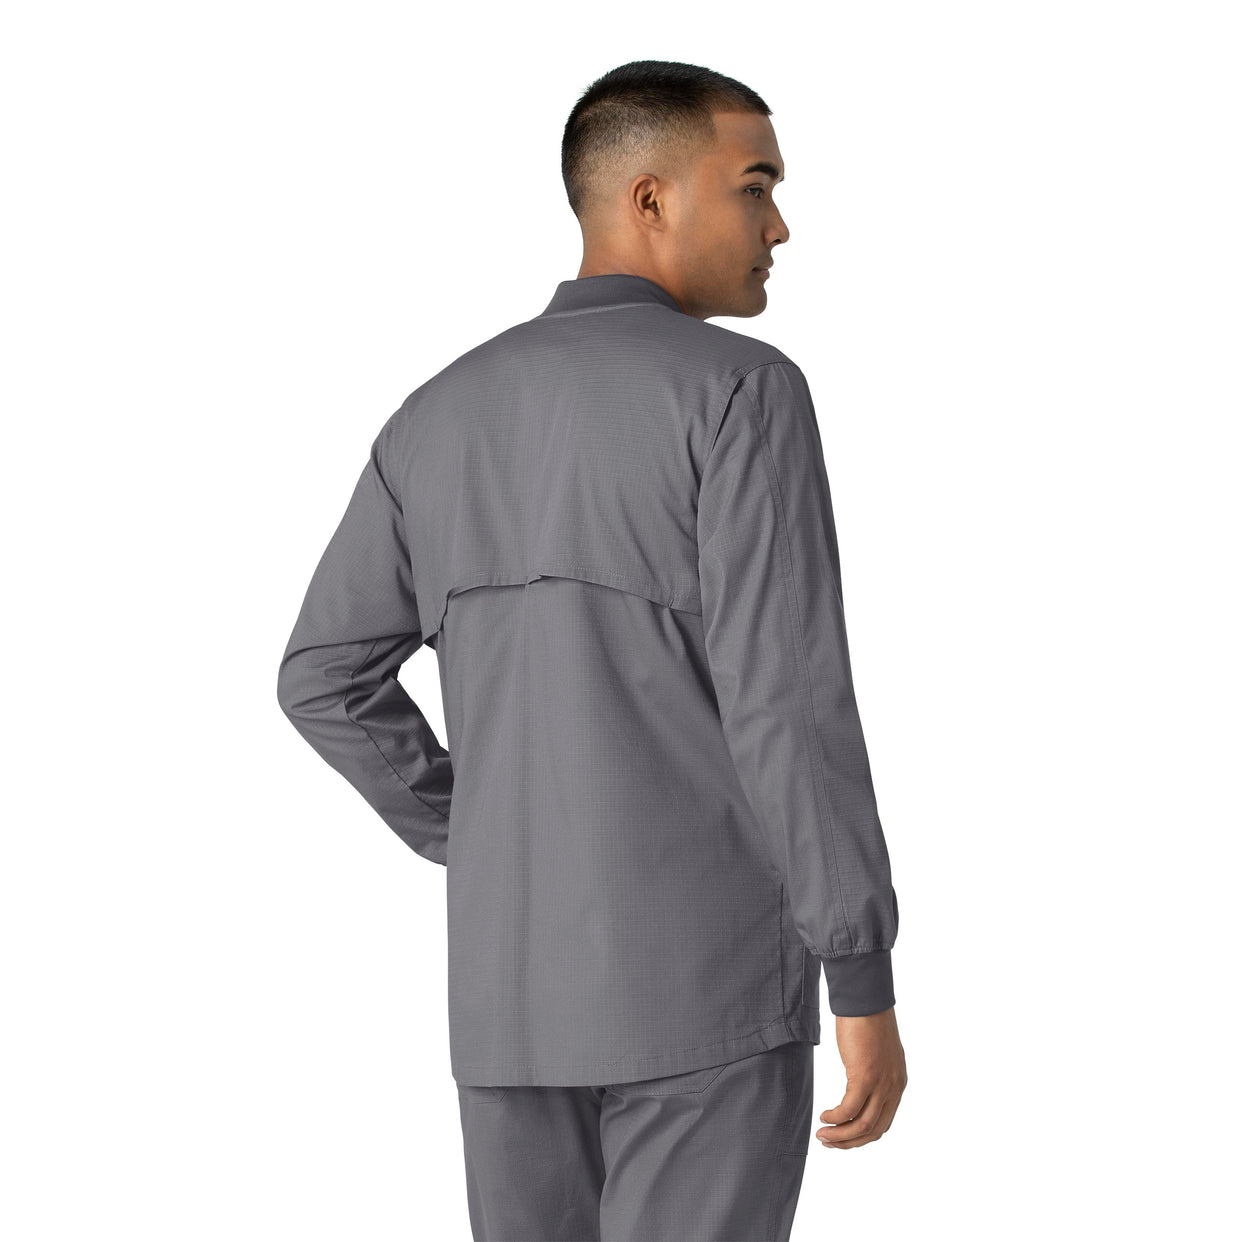 Rugged Flex Ripstop Men's Utility Warm-Up Jacket Pewter back view